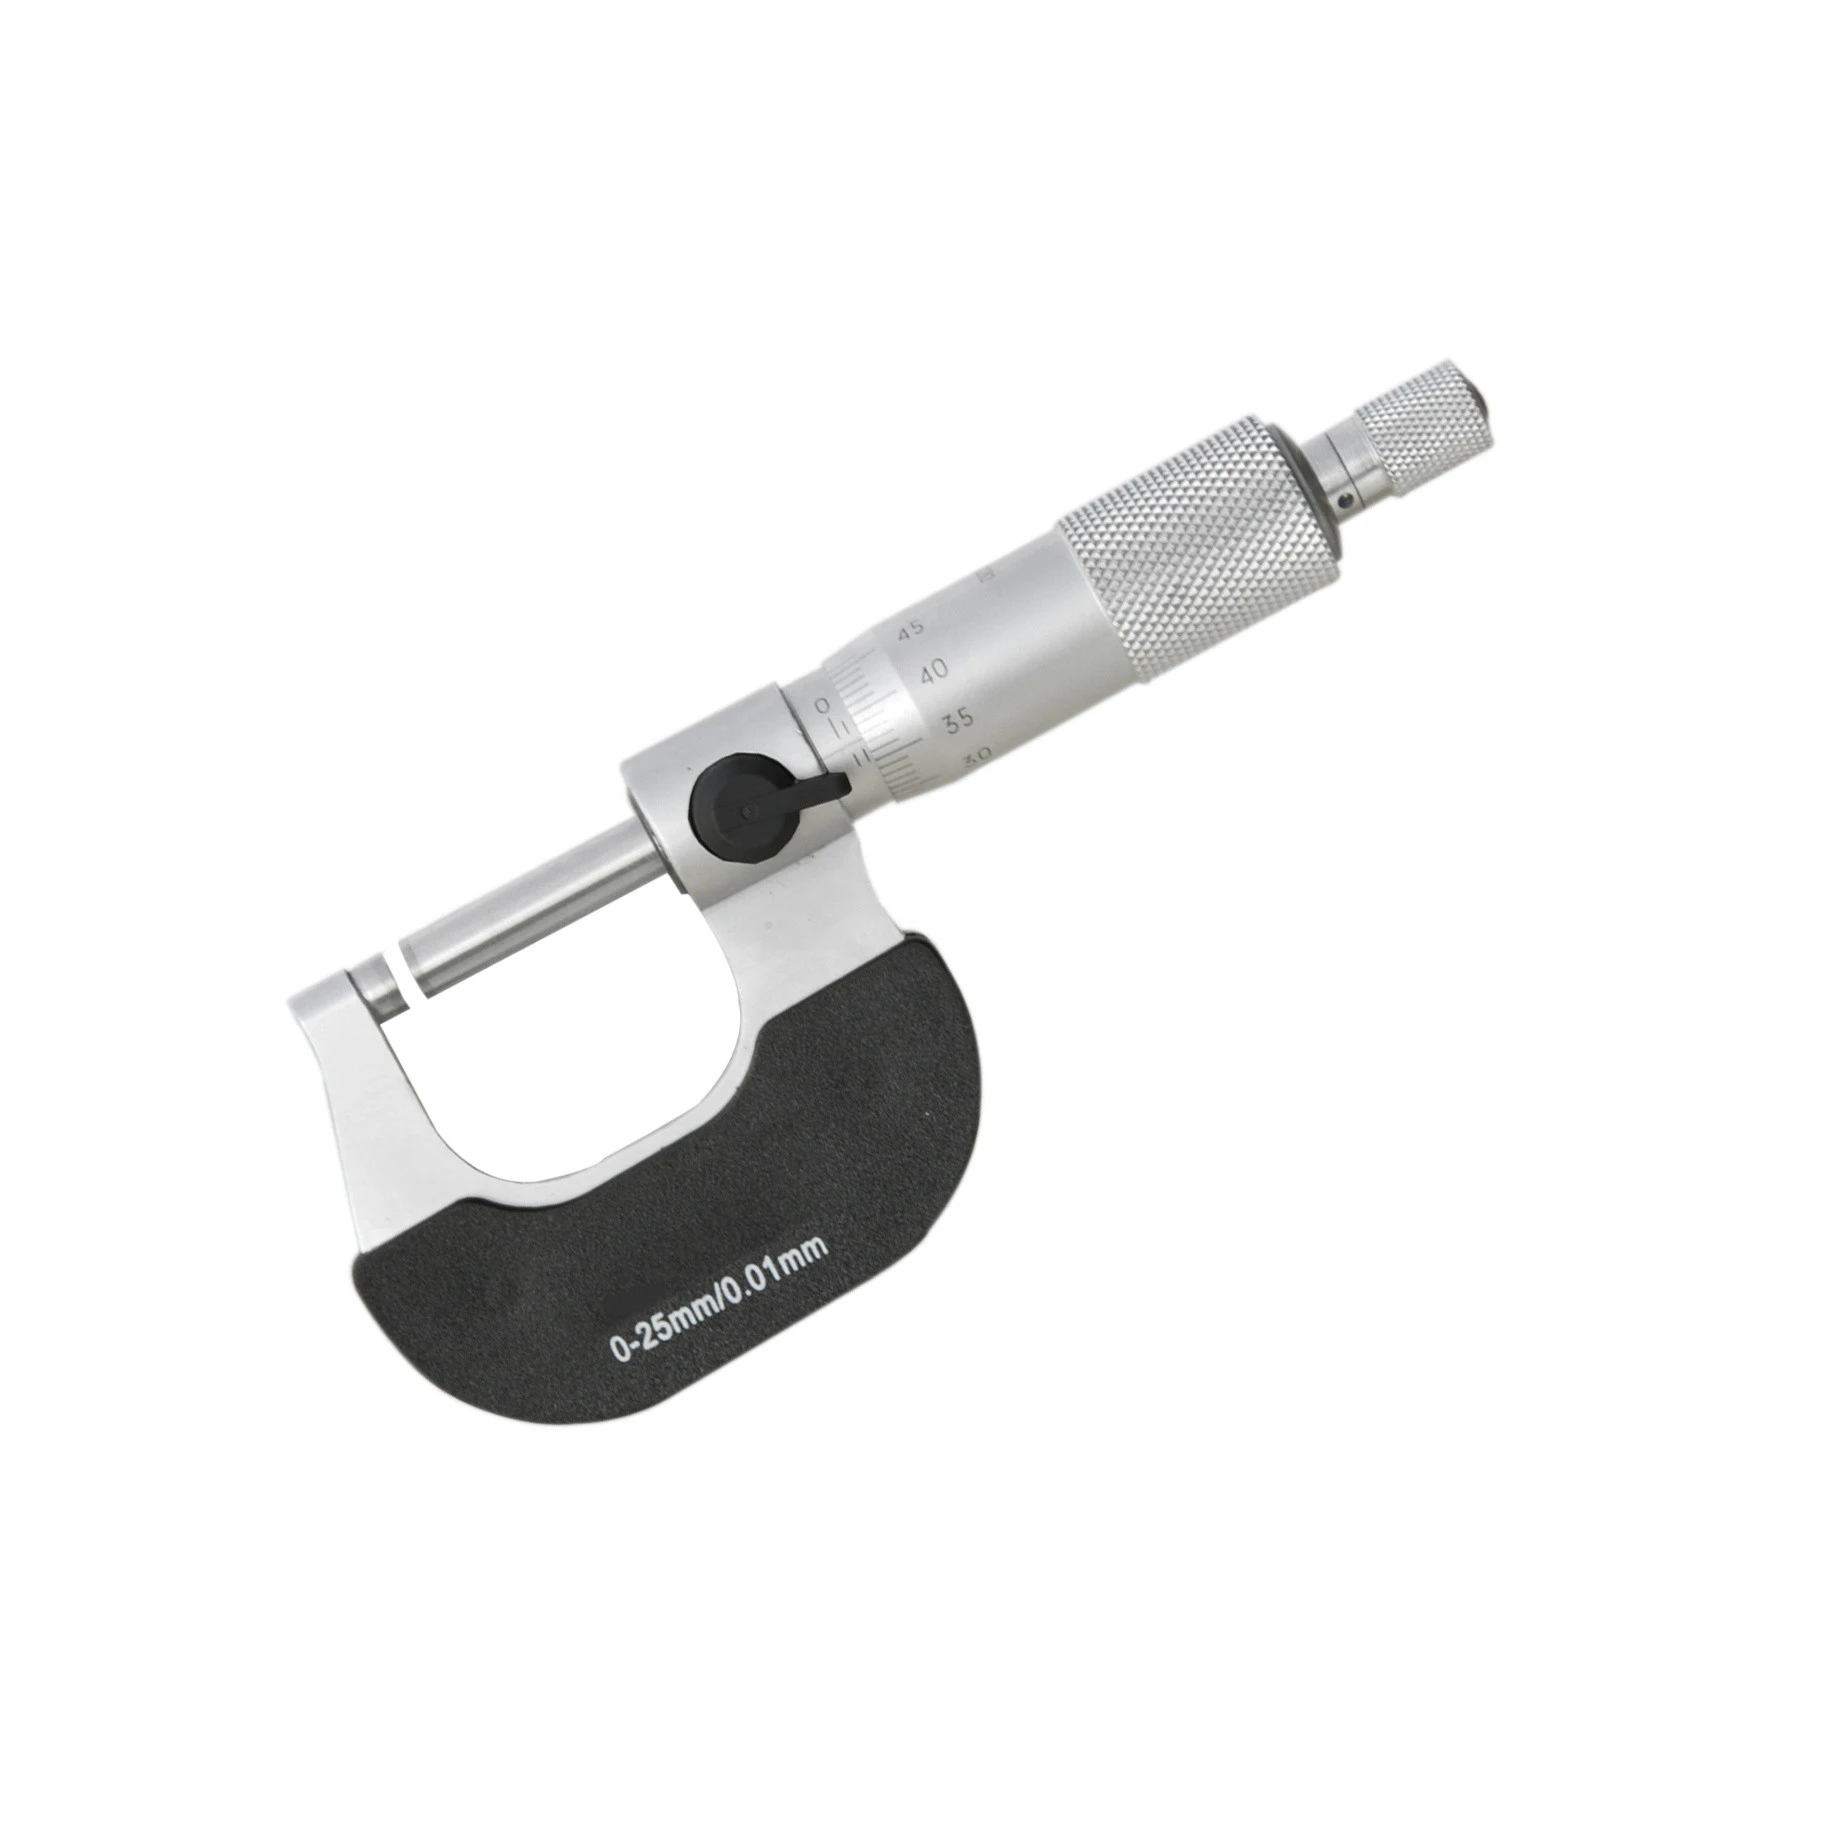 0-25mm/50mm Outside Micrometer, Thickness Gauge